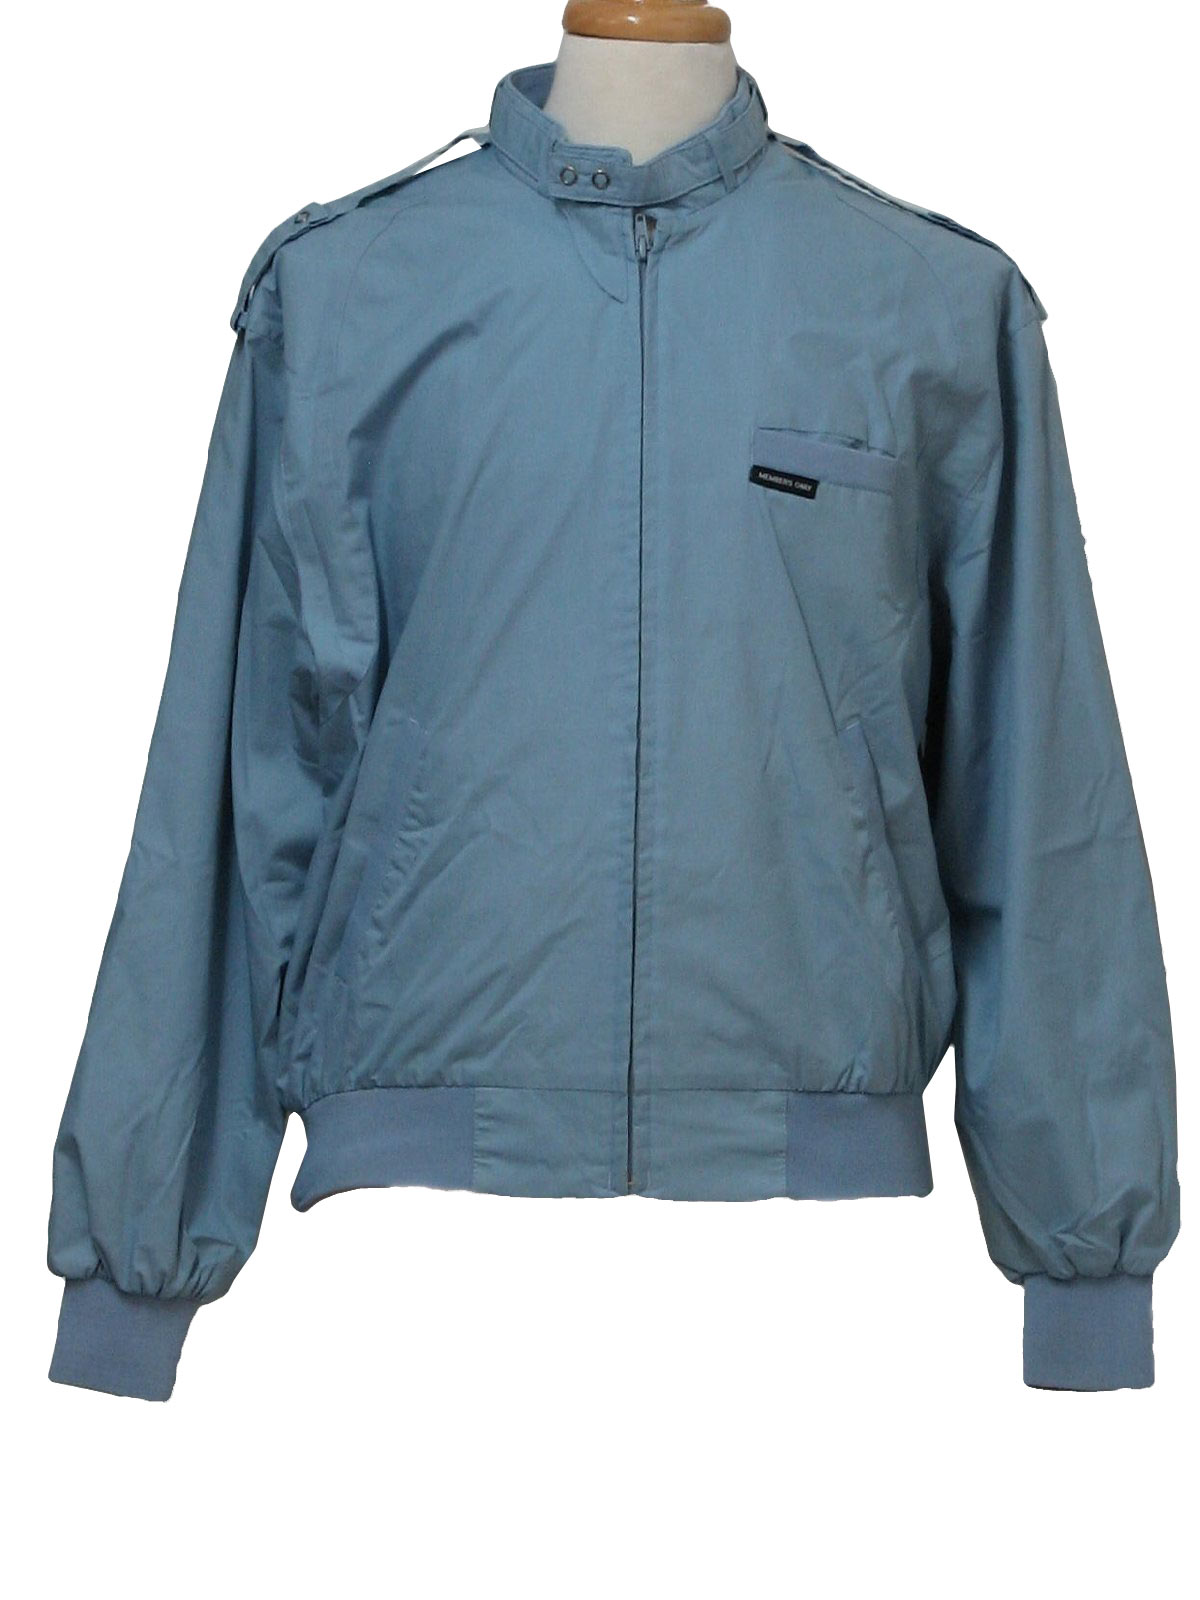 Retro 1980's Jacket (Members Only) : 80s -Members Only- Mens light blue ...